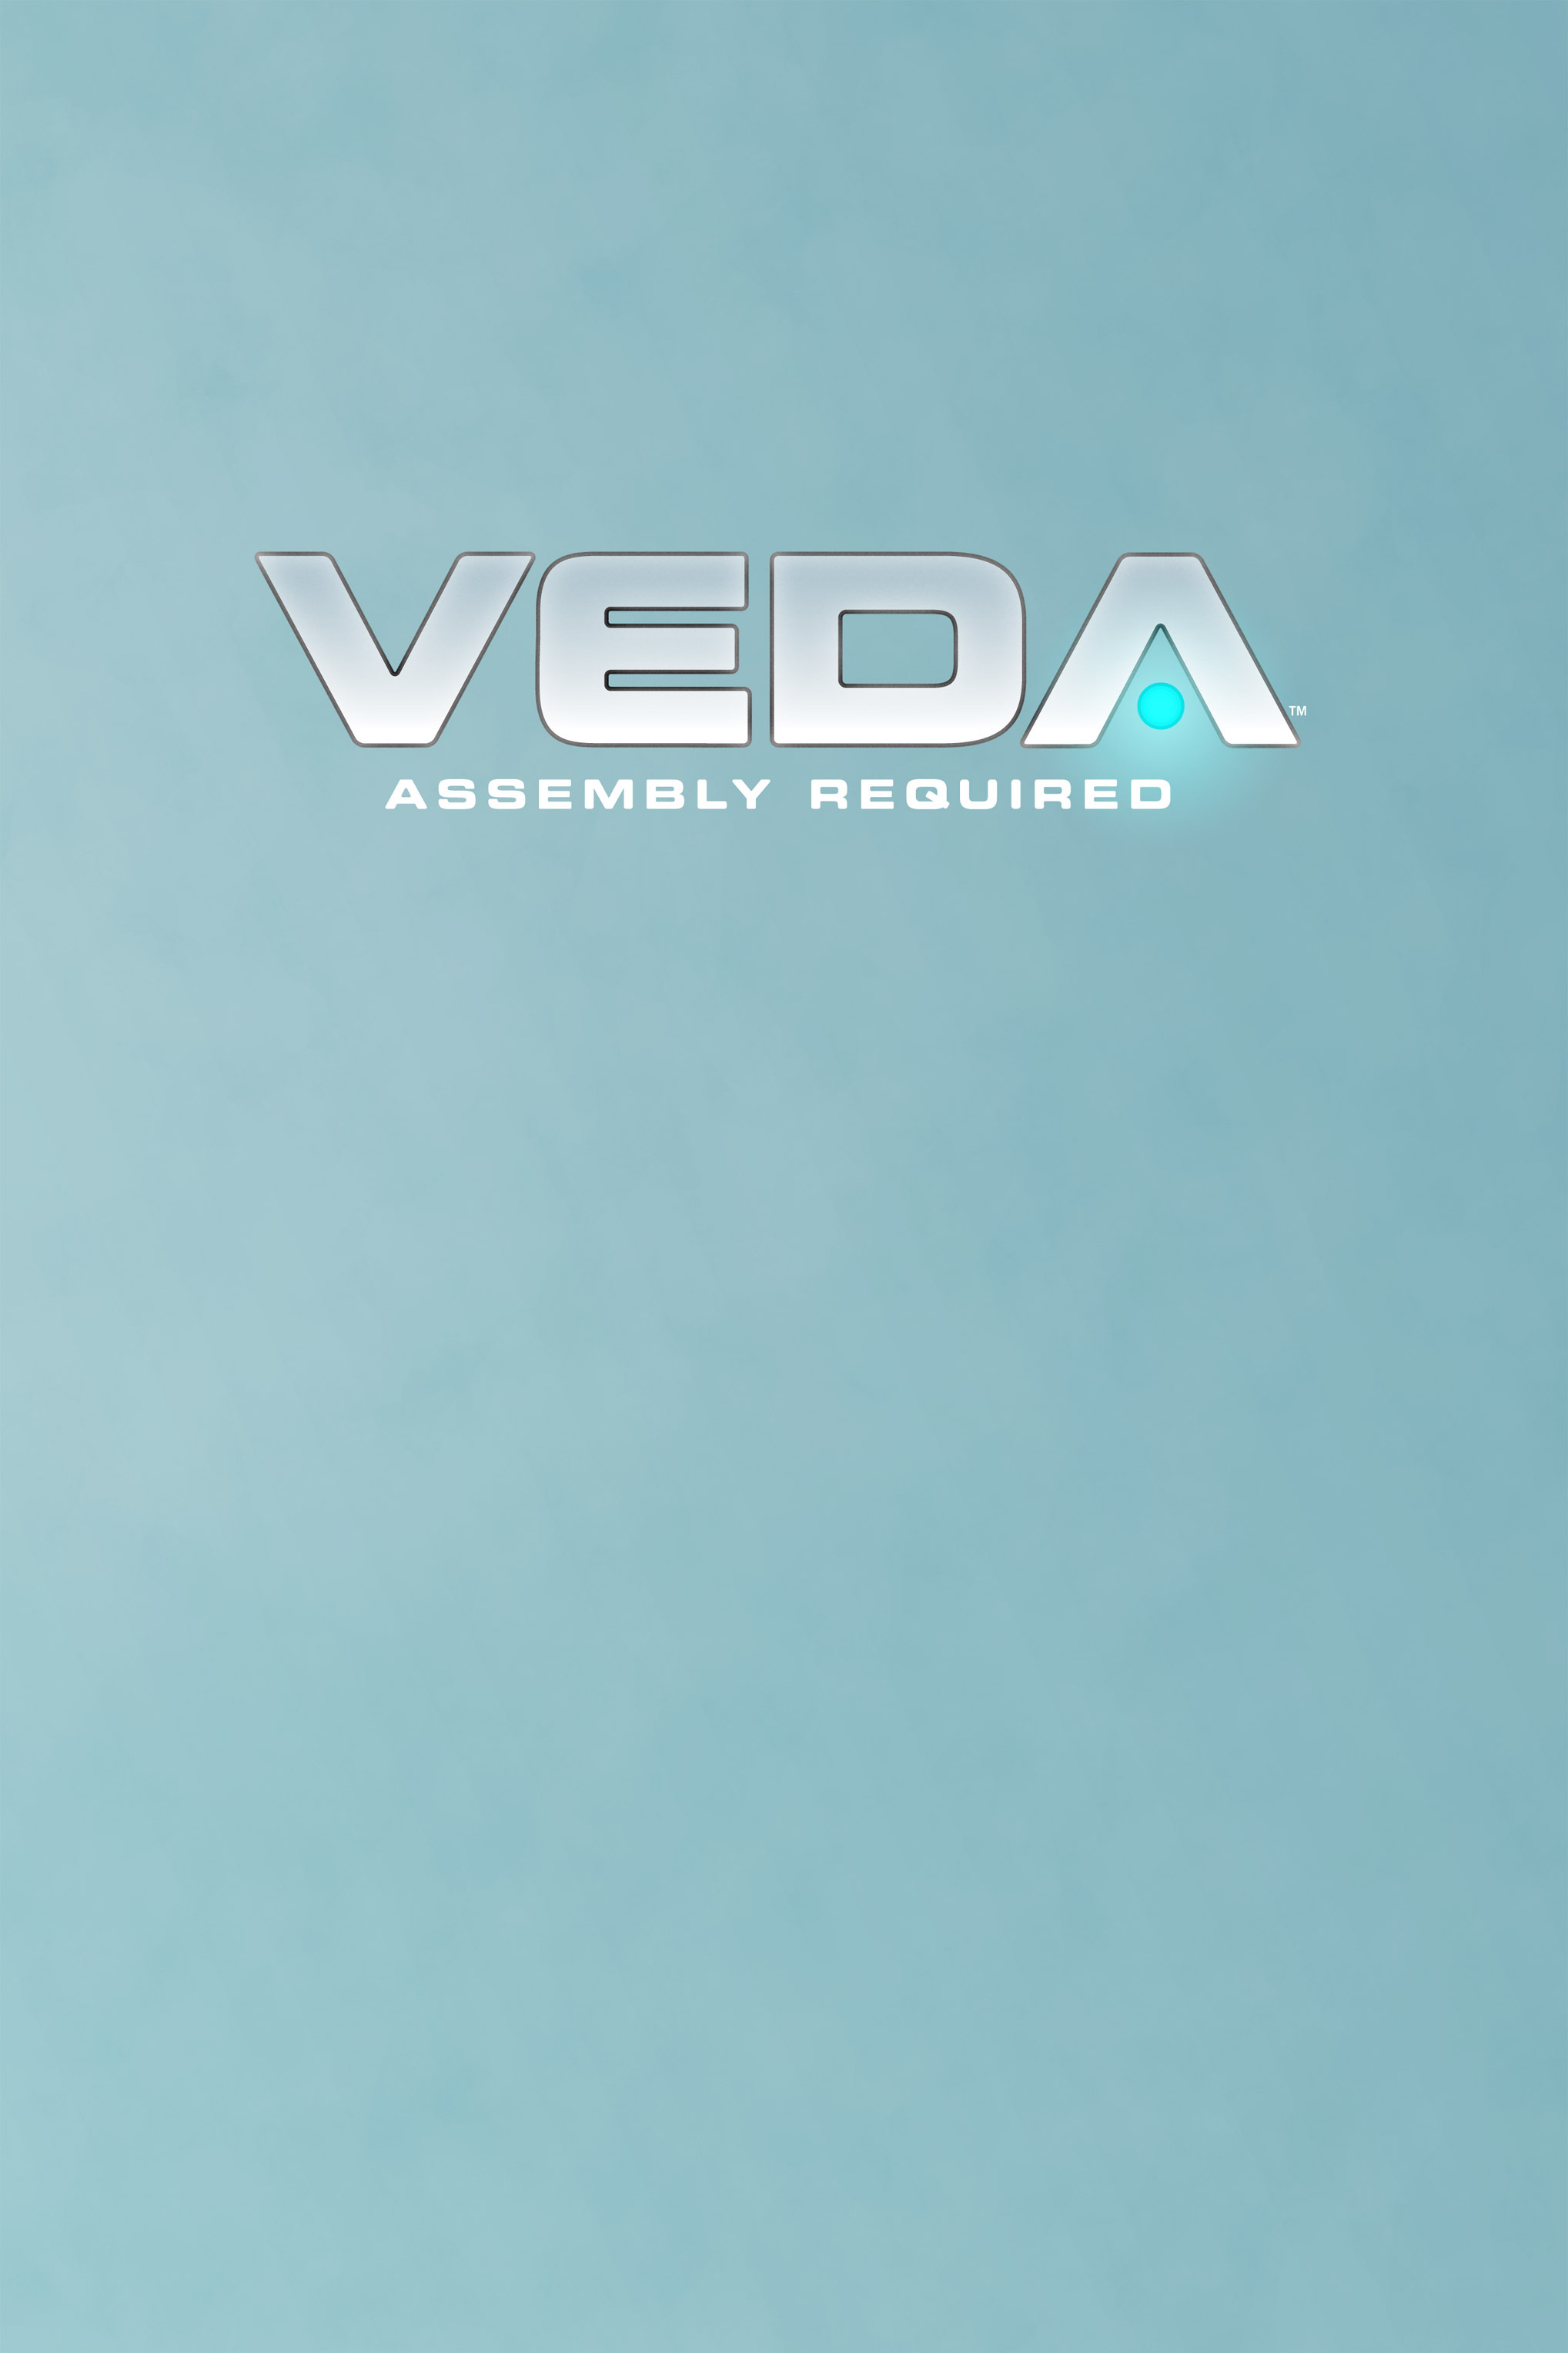 Read online Veda: Assembly Required comic -  Issue # TPB - 3